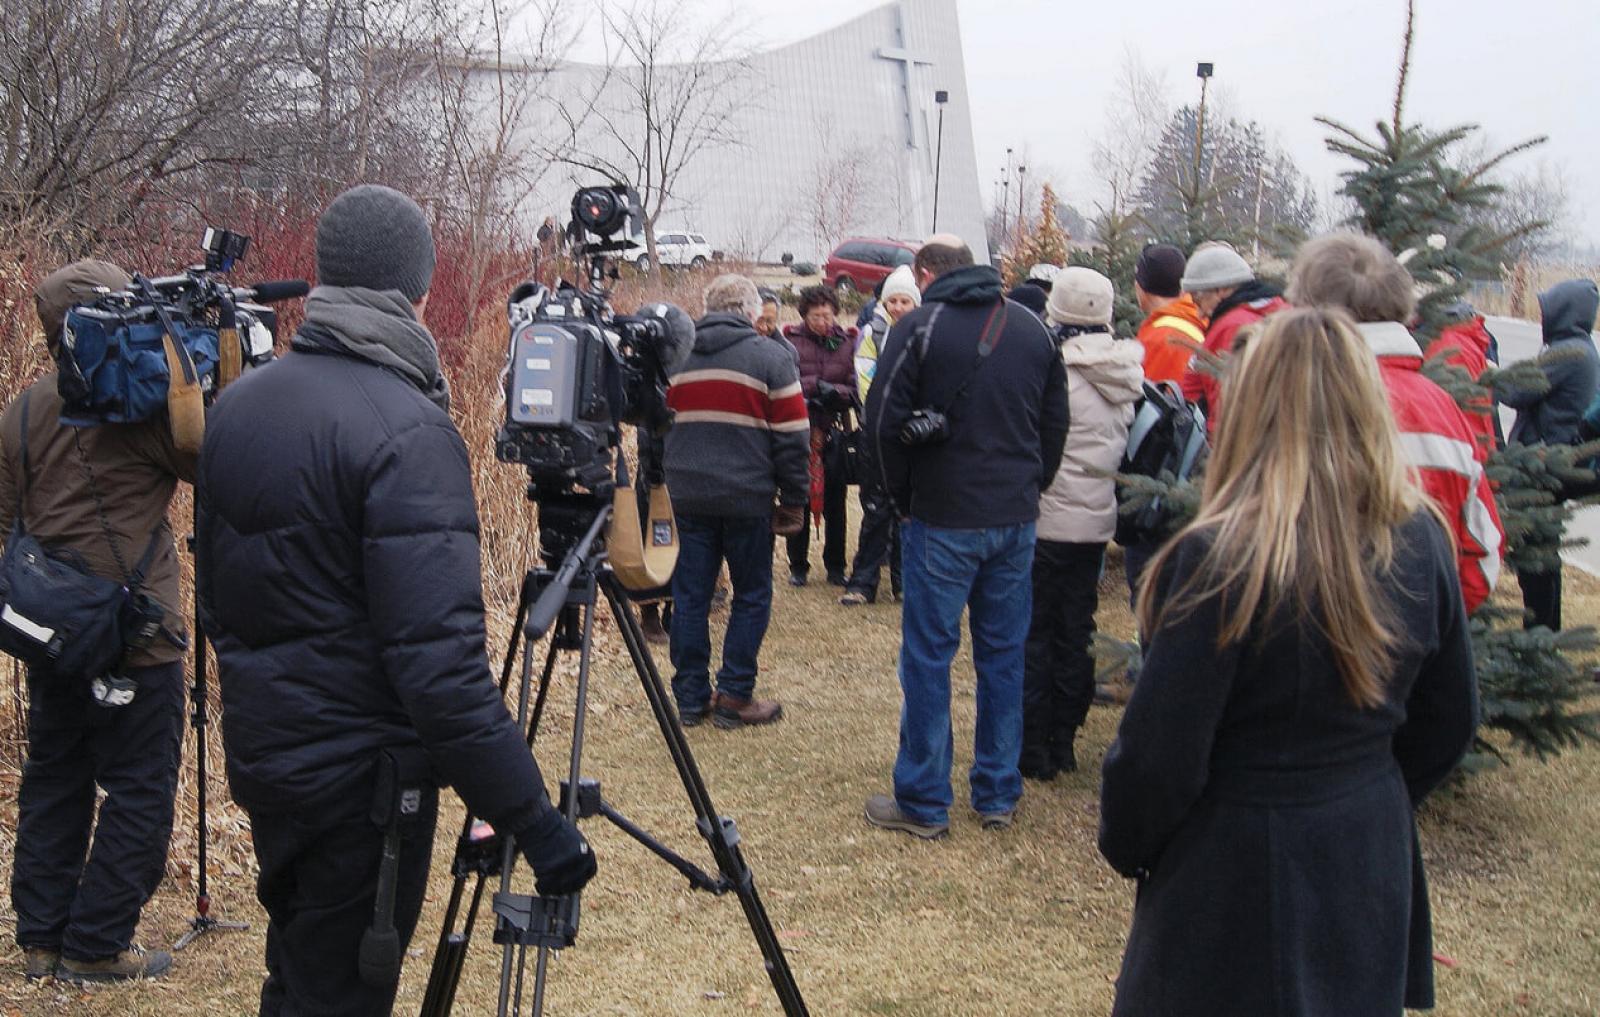 Media, politicians and many others gathered at the Chinese Baptist Church in Scarborough for the ceremony and cutting process to begin the Vimy Oaks project.